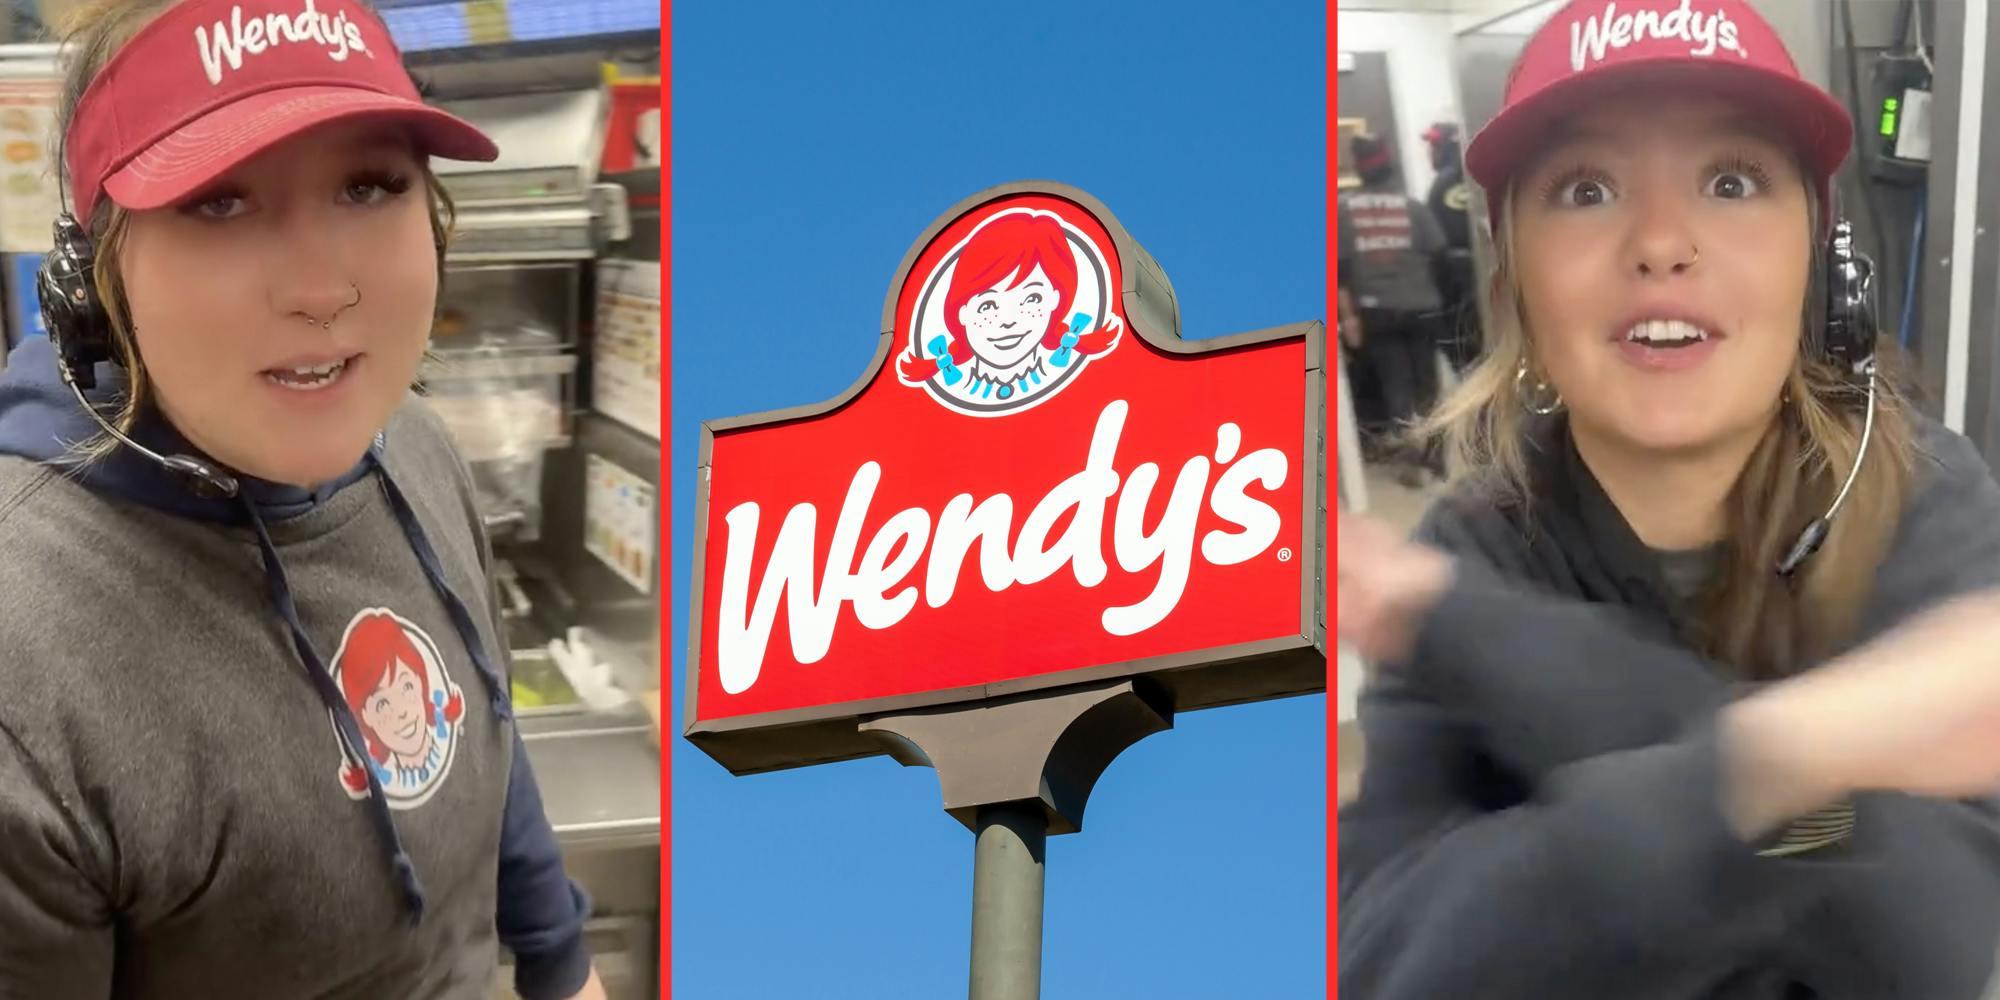 Wendy's workers(l+r), Wendy's sign(c)